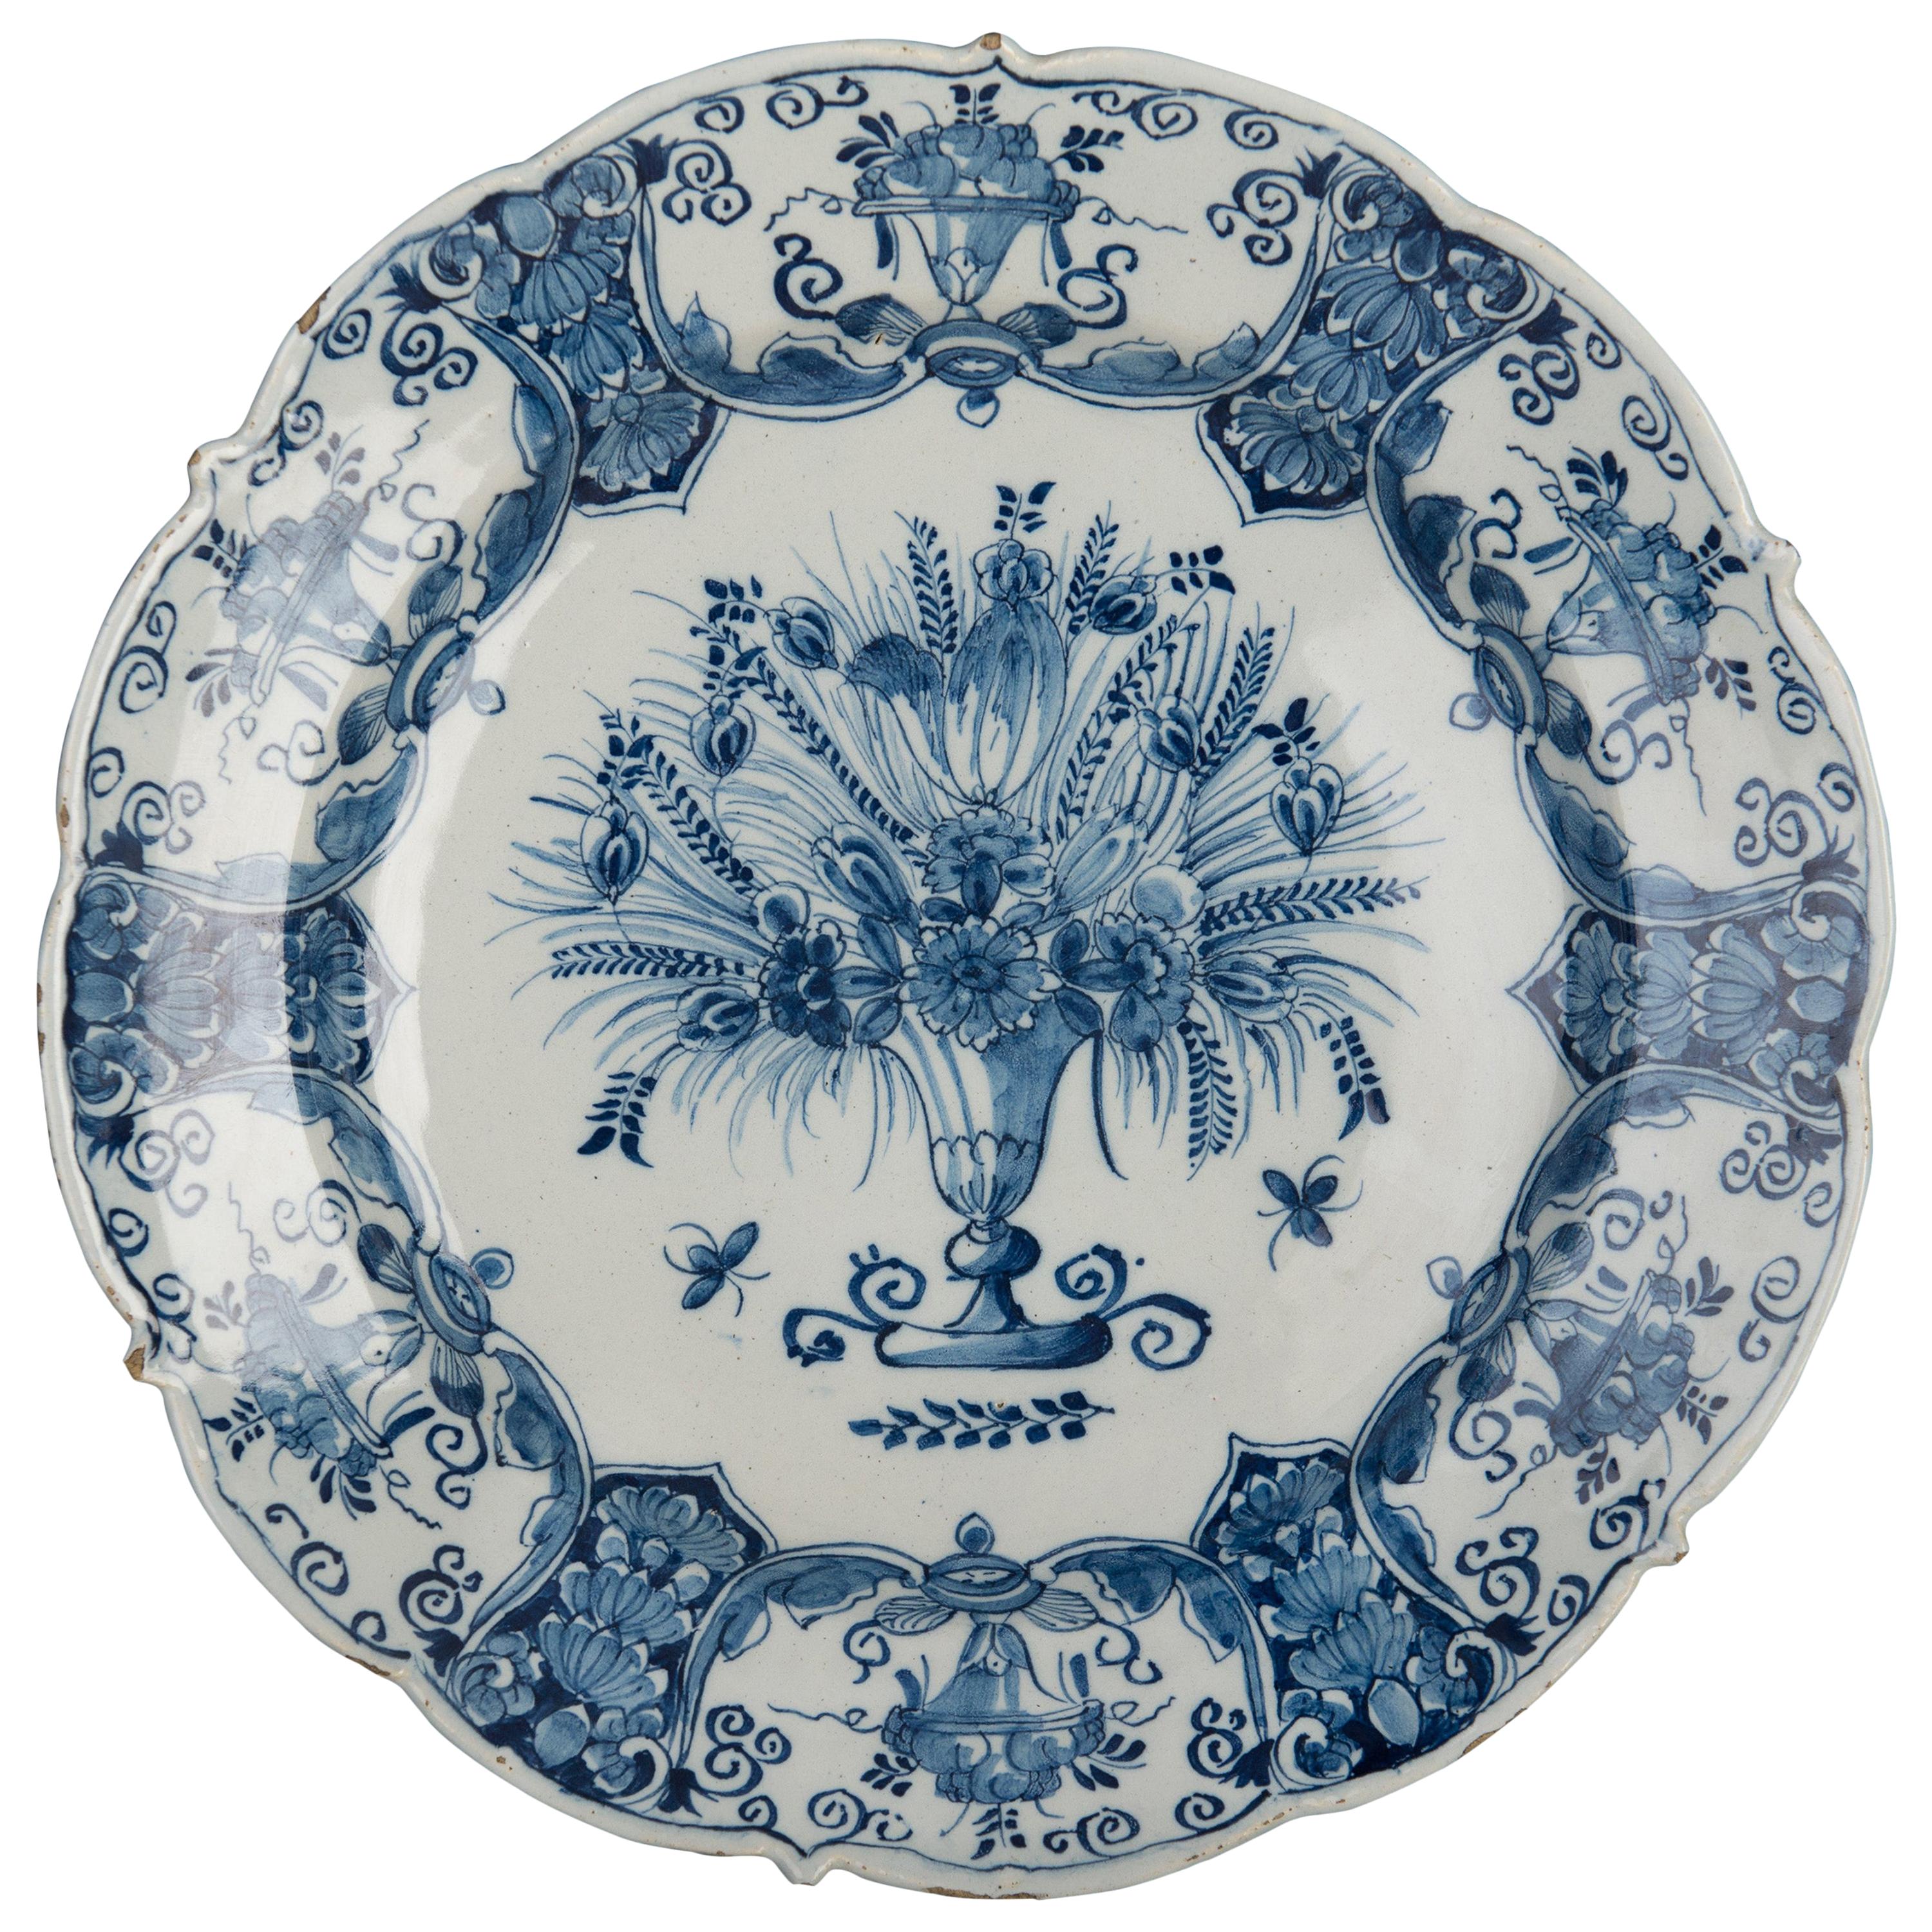 Delft, Large Blue and White Dish with Flower Vase, 1750, the Three Bells Pottery